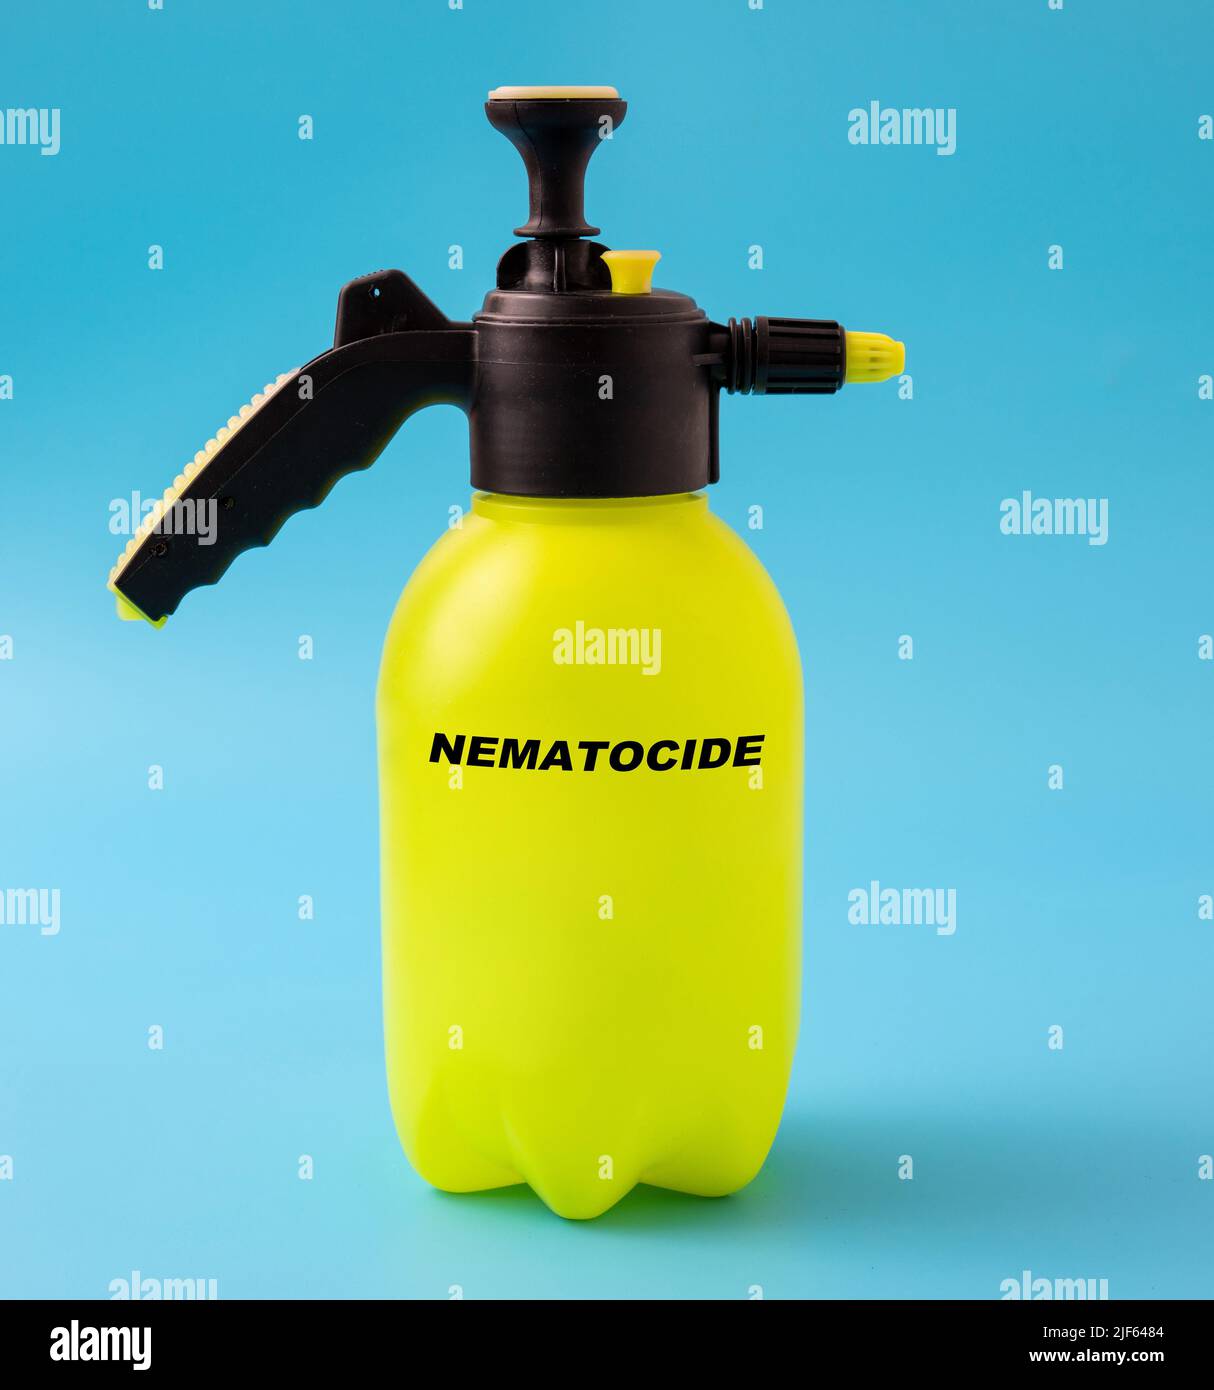 Nematocide agricultural chemicals in in a plastic spray Stock Photo